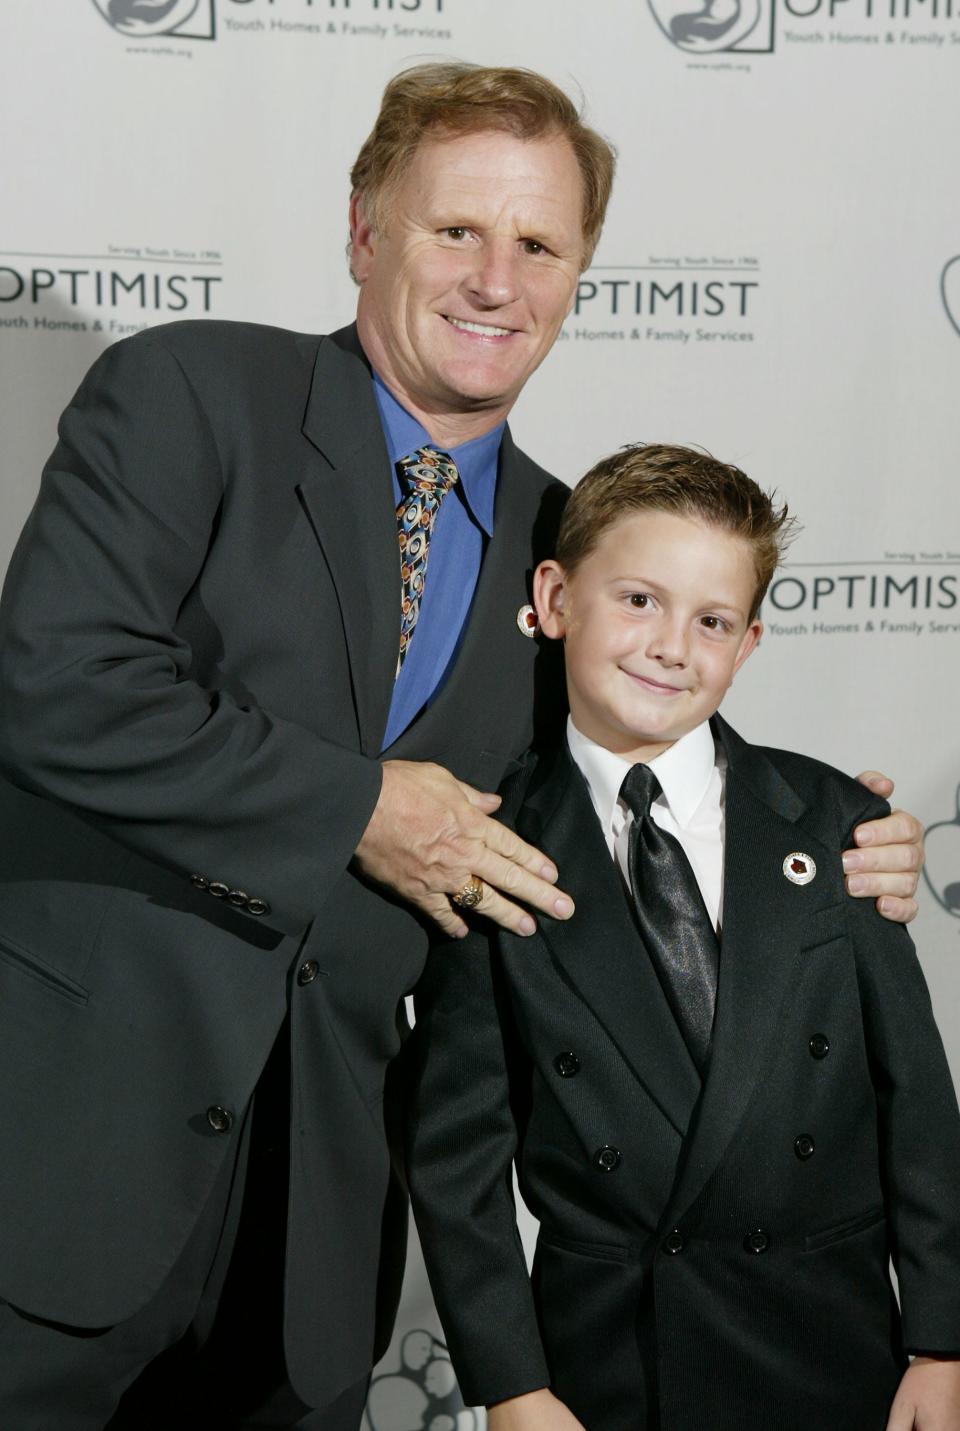 "NYPD Blue" actors Gordon Clapp and Austin Majors pose at The 7th Annual Mentor Awards Gala benefiting Optimist Youth Homes & Family Services to help honor two of their own - David Milch, co-creator/executive producer of the series, and Bill Clark, executive producer at the Biltmore Hotel, October 29, 2003 in Los Angeles, California.